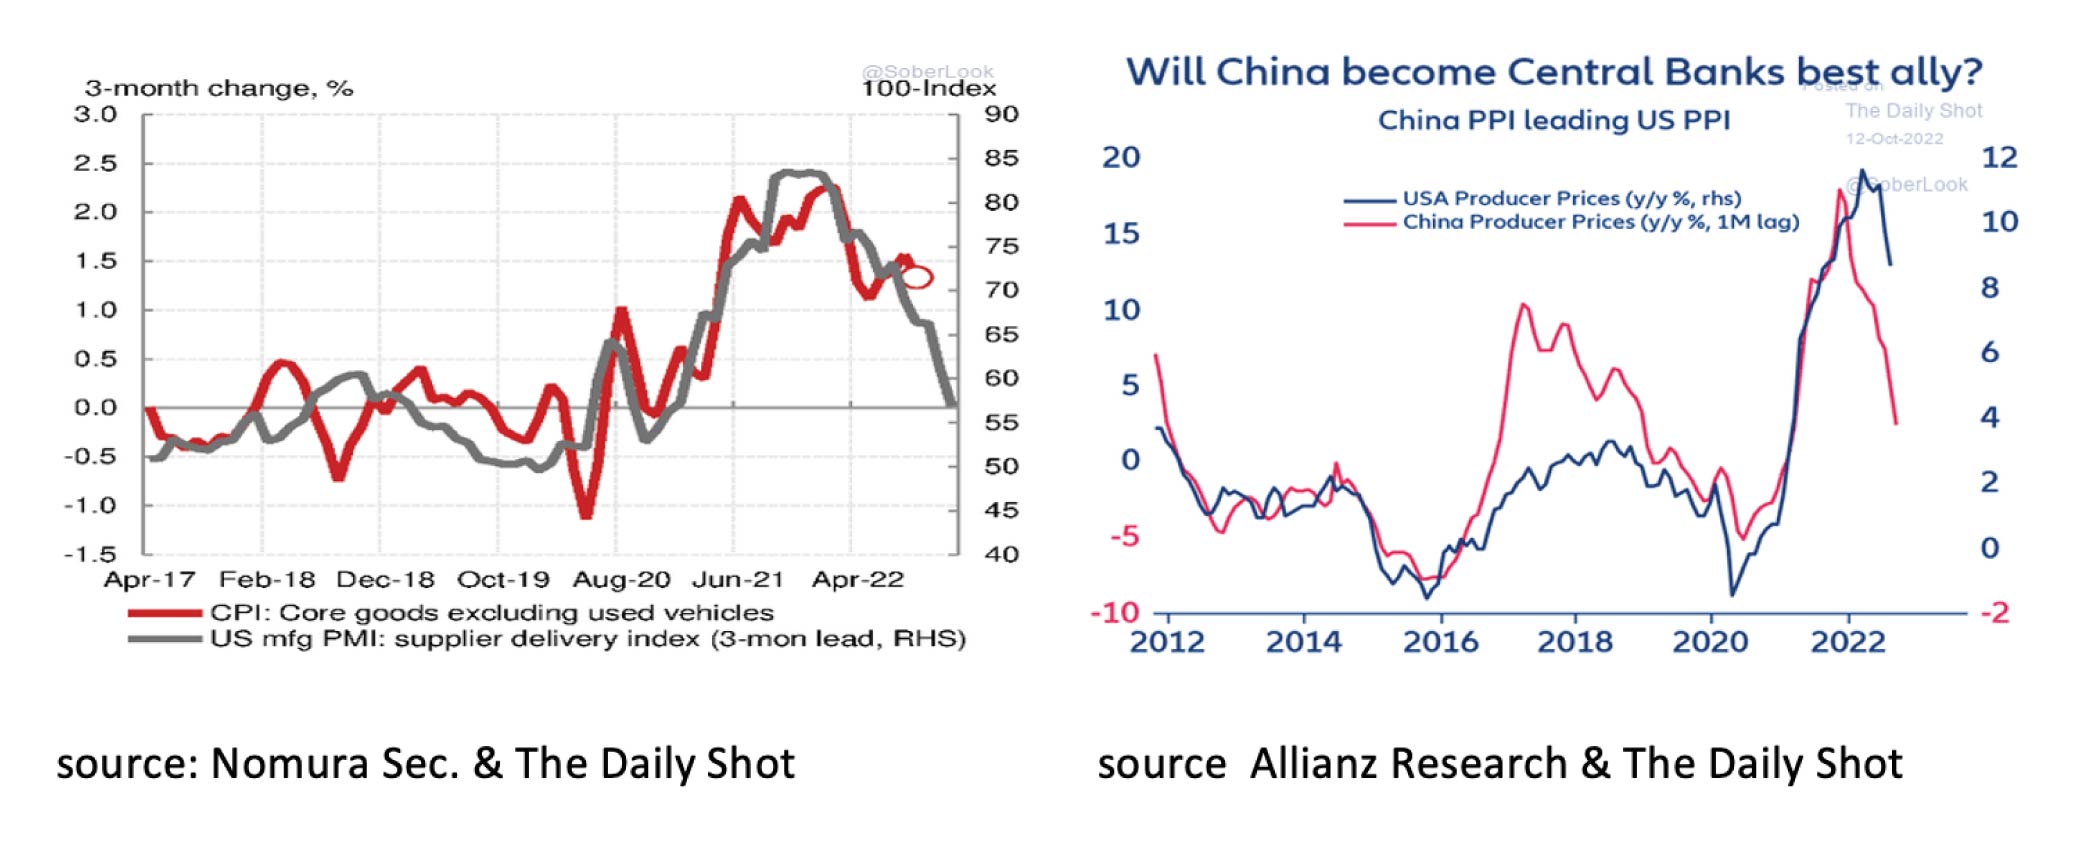 Will China become Central Banks best ally - Nov22